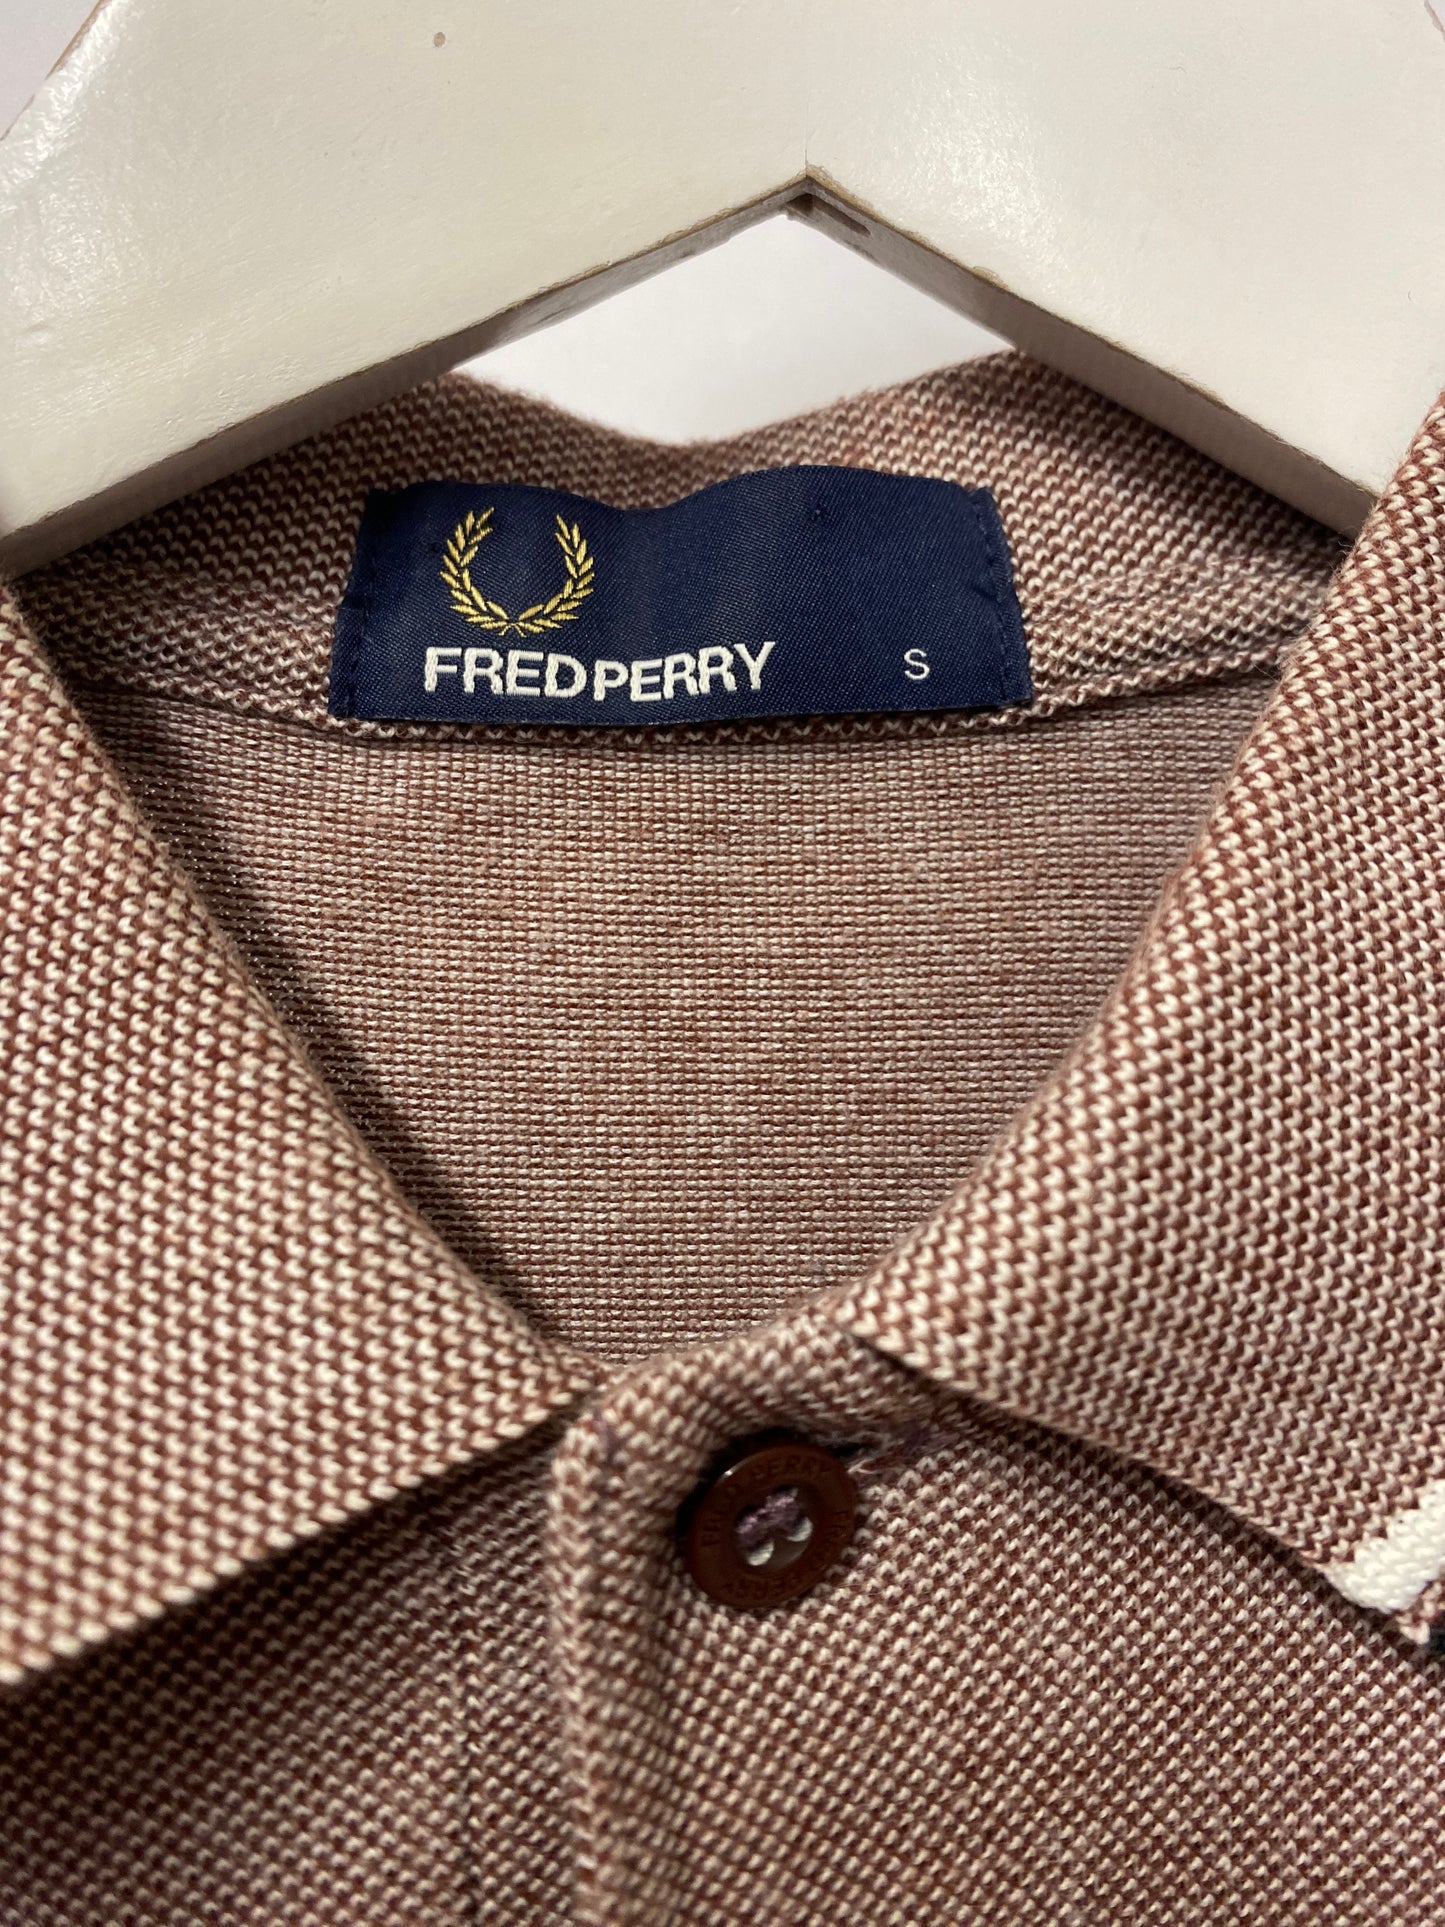 Fred Perry Maroon and White Tonic Pique M3600 Polo Shirt Small